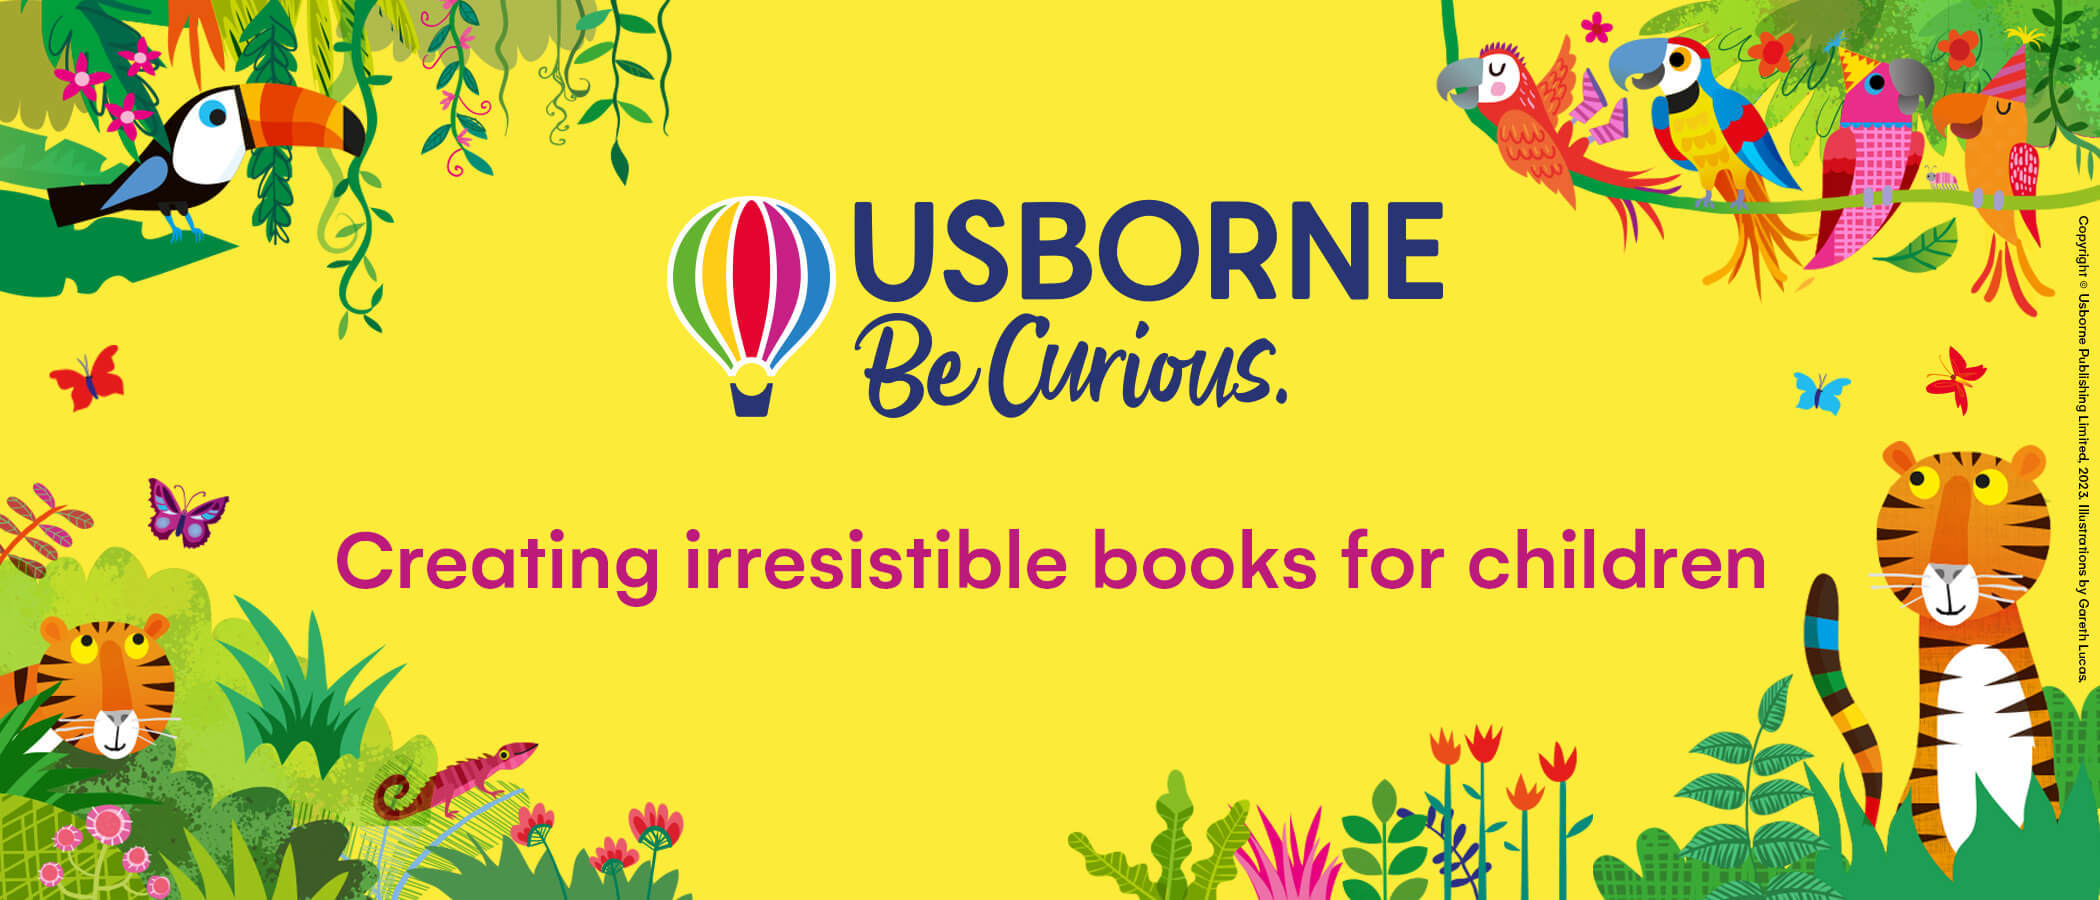 Usborne — Be Curious. Creating irrisisible books for children